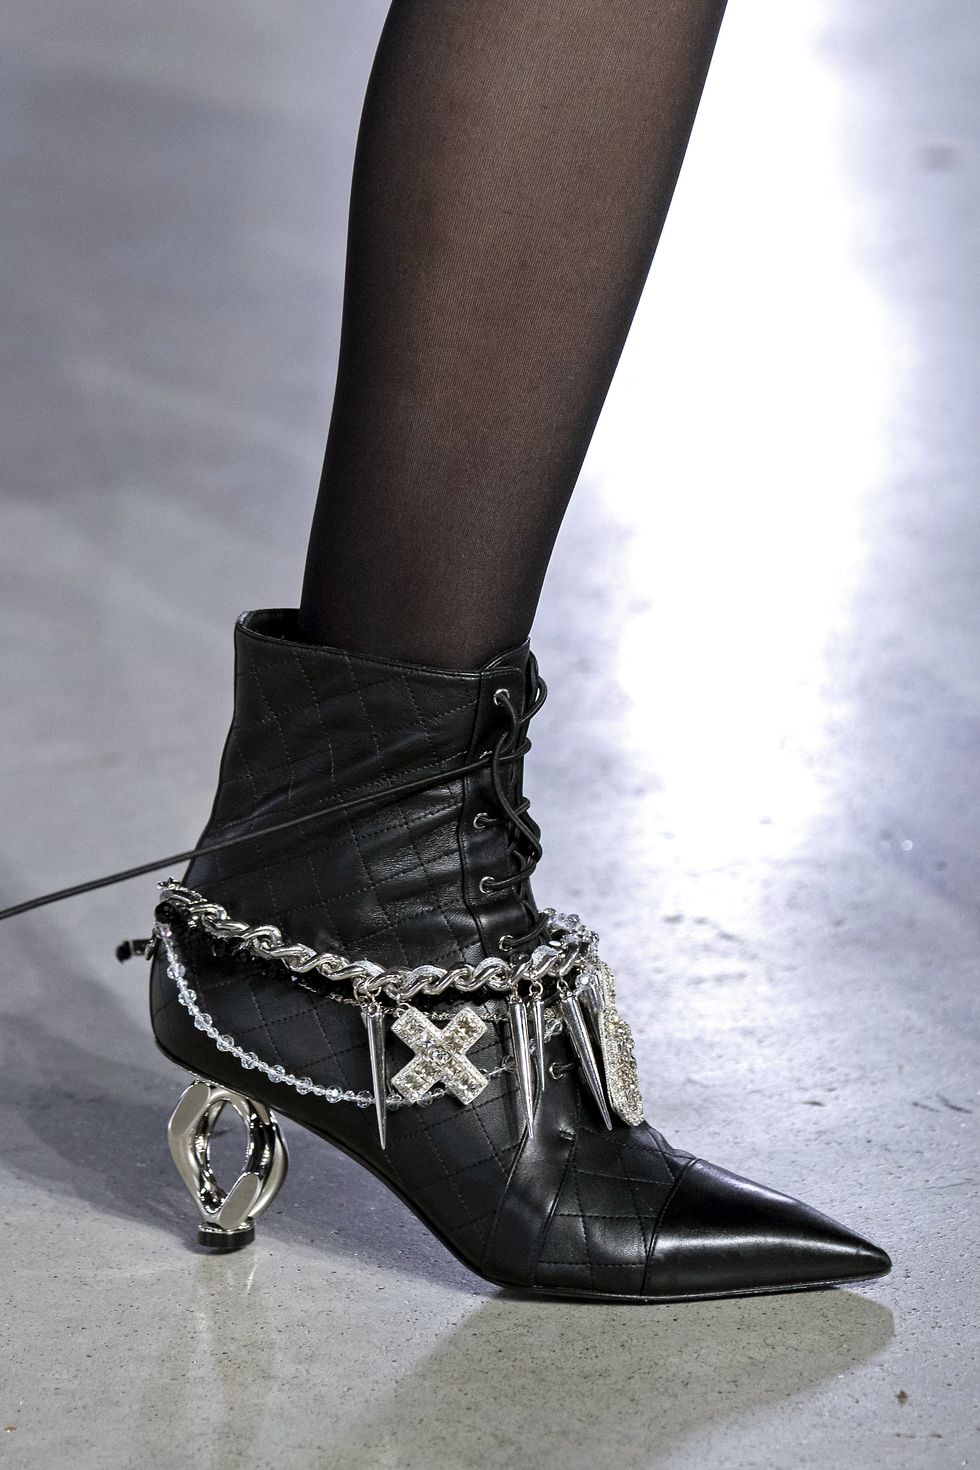 15 Fall Shoe Trends 2019 — Top Fall Accessory Runway Trends For Women